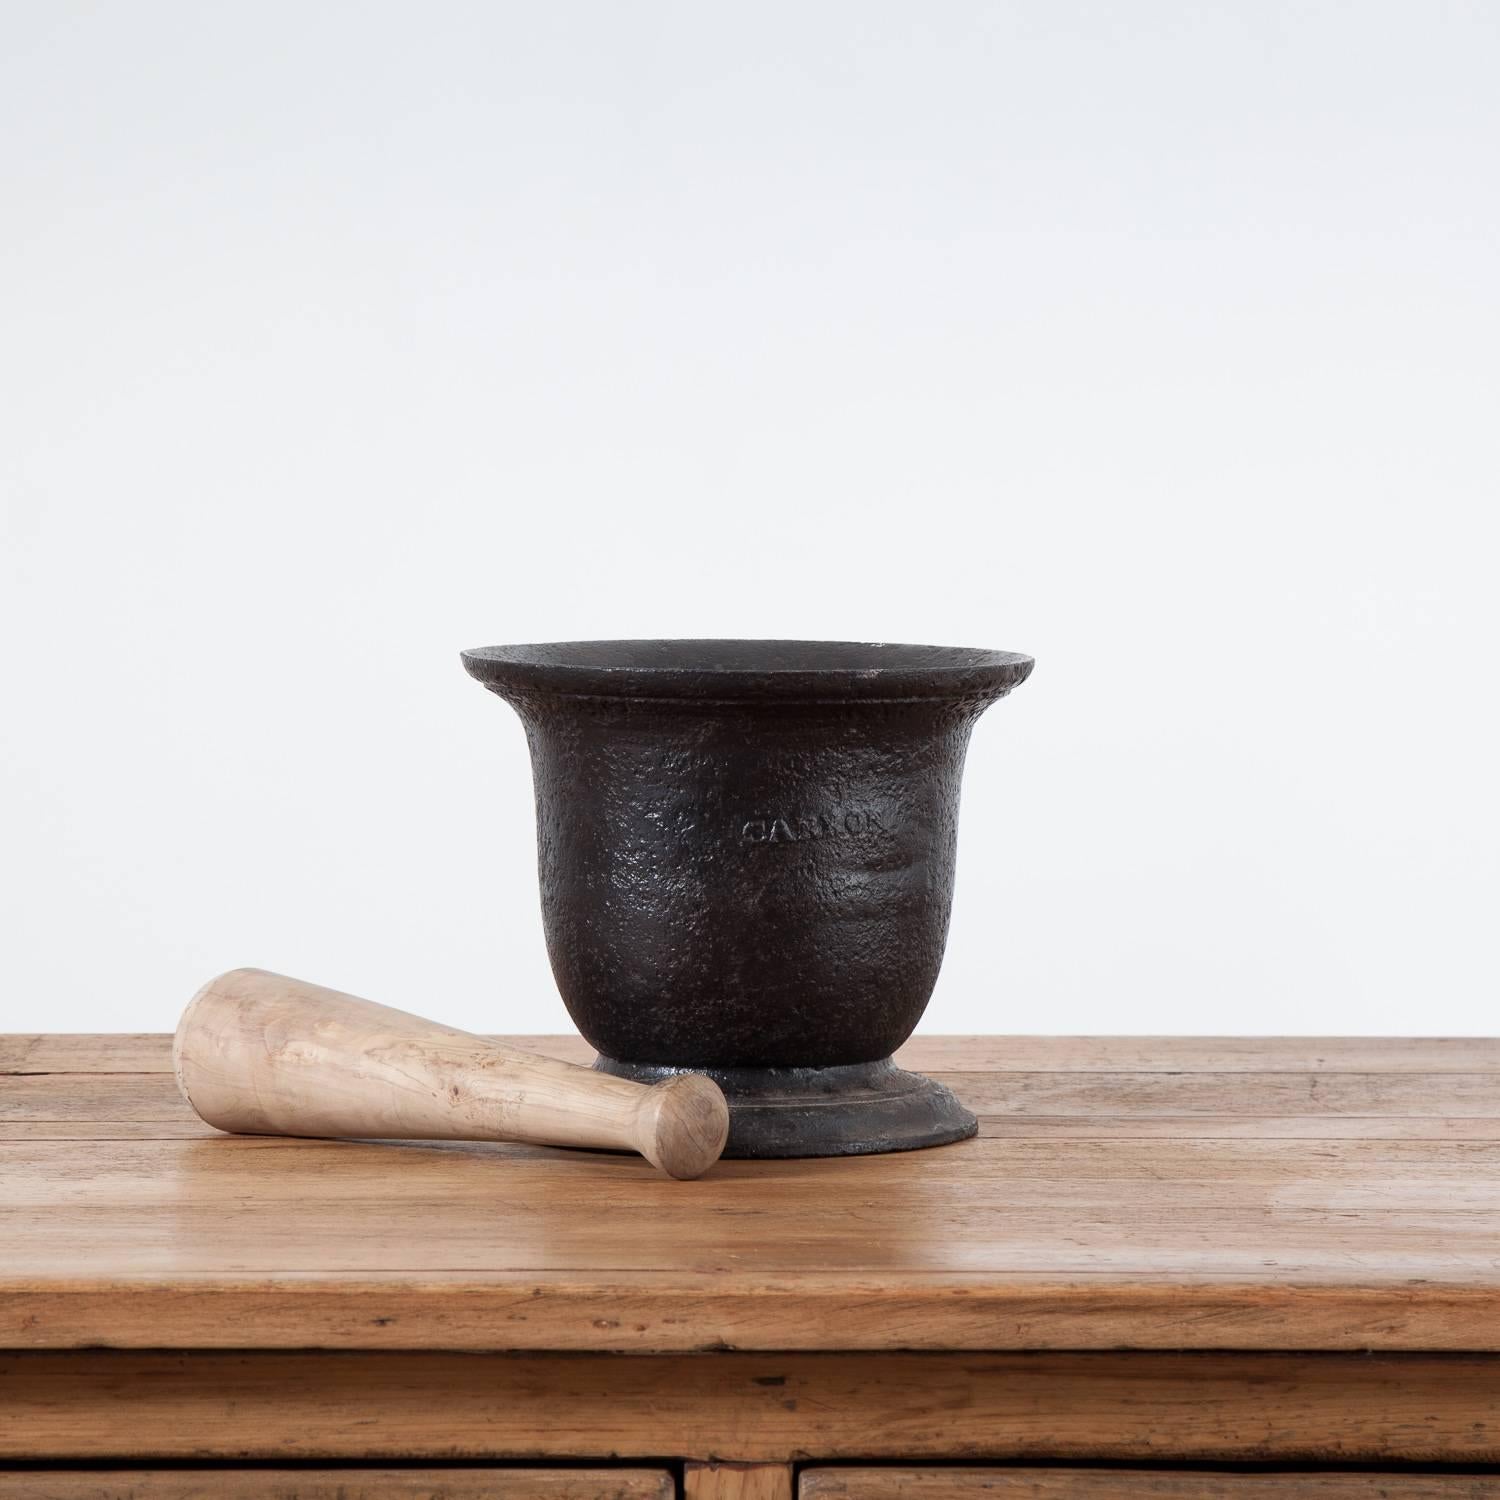 Very nice cast iron pestle and mortar with a lovely replacement wooden pestle.

This piece has been stamped Carron.

The Carron Company was an ironworks established in 1759 on the banks of the River Carron near Falkirk, in Stirlingshire,